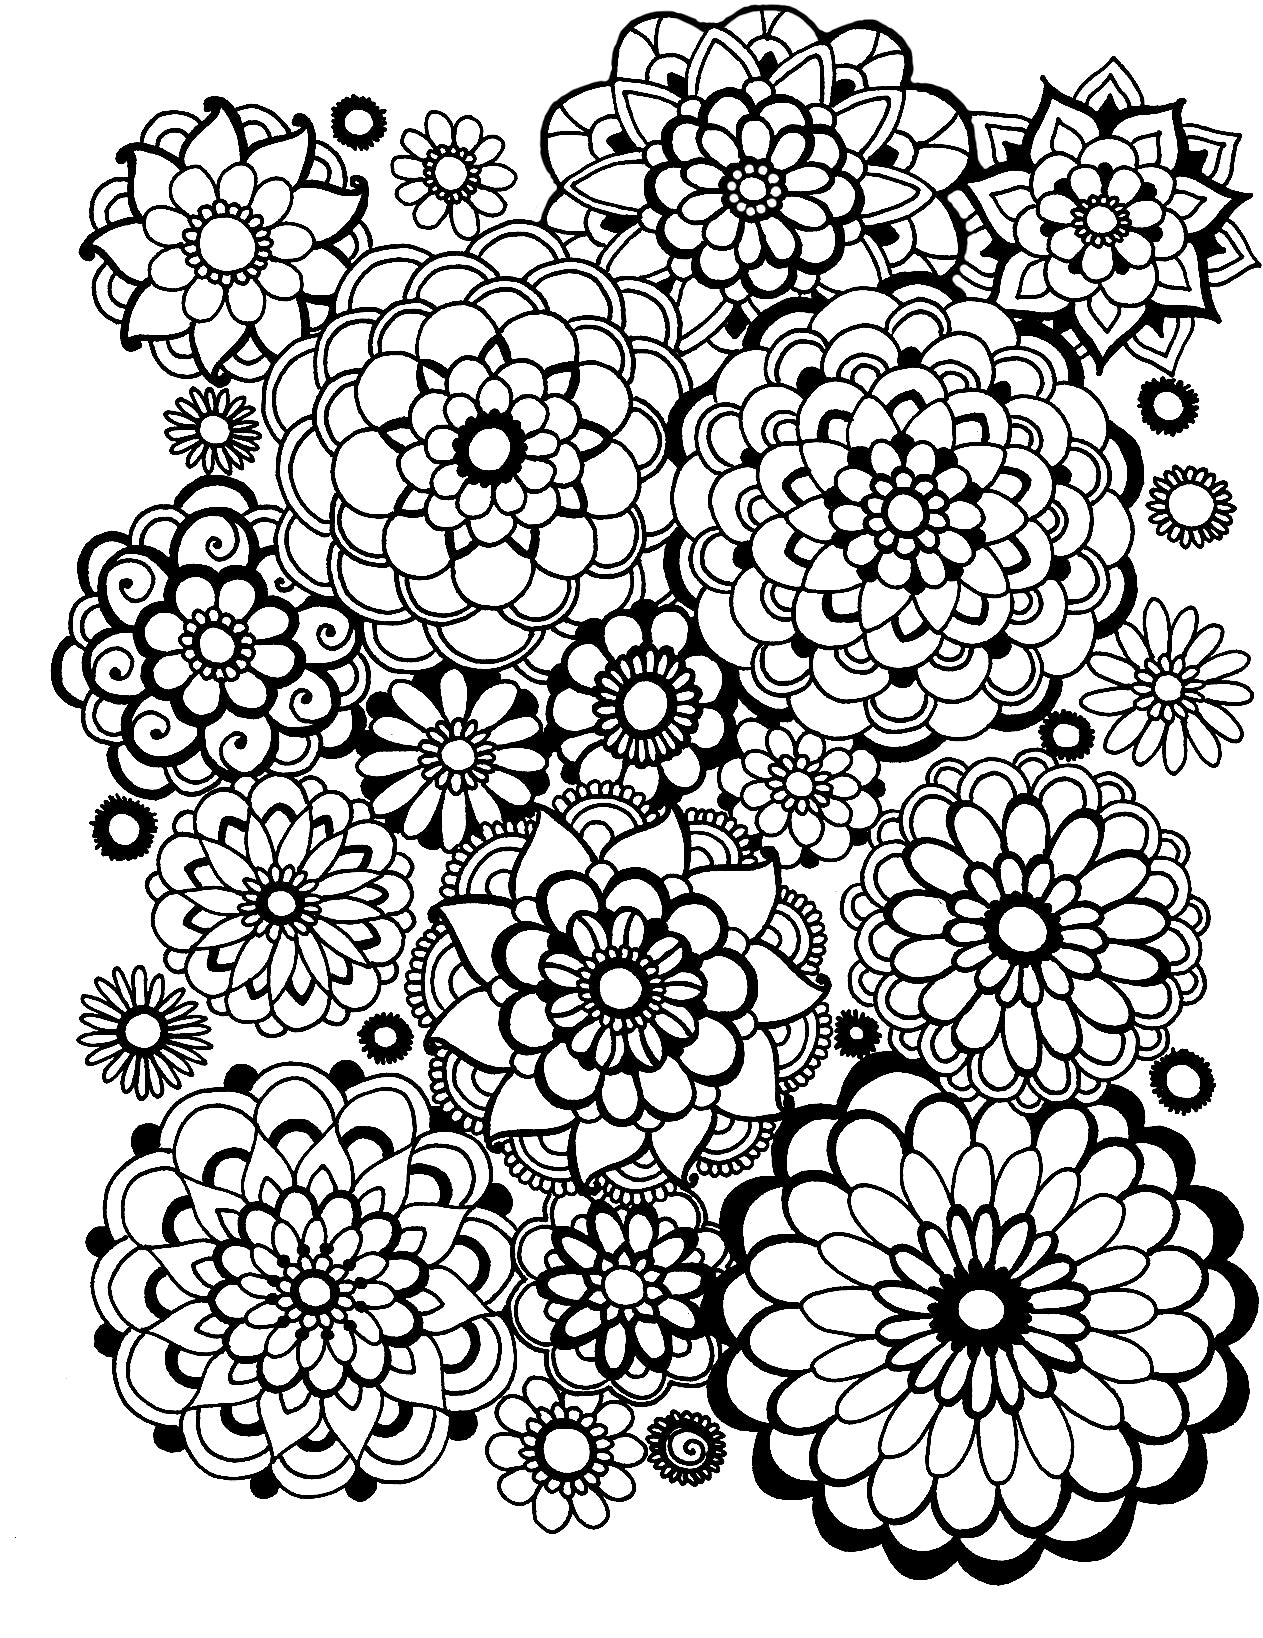 An array of intricately designed mandala flowers in a dynamic, explosion-like arrangement for an adult coloring page. The image features a diverse collection of mandalas with various patterns, from tightly packed petals to radiating circular designs, resembling a bouquet of fireworks made of flowers. Free coloring page :: YouColor